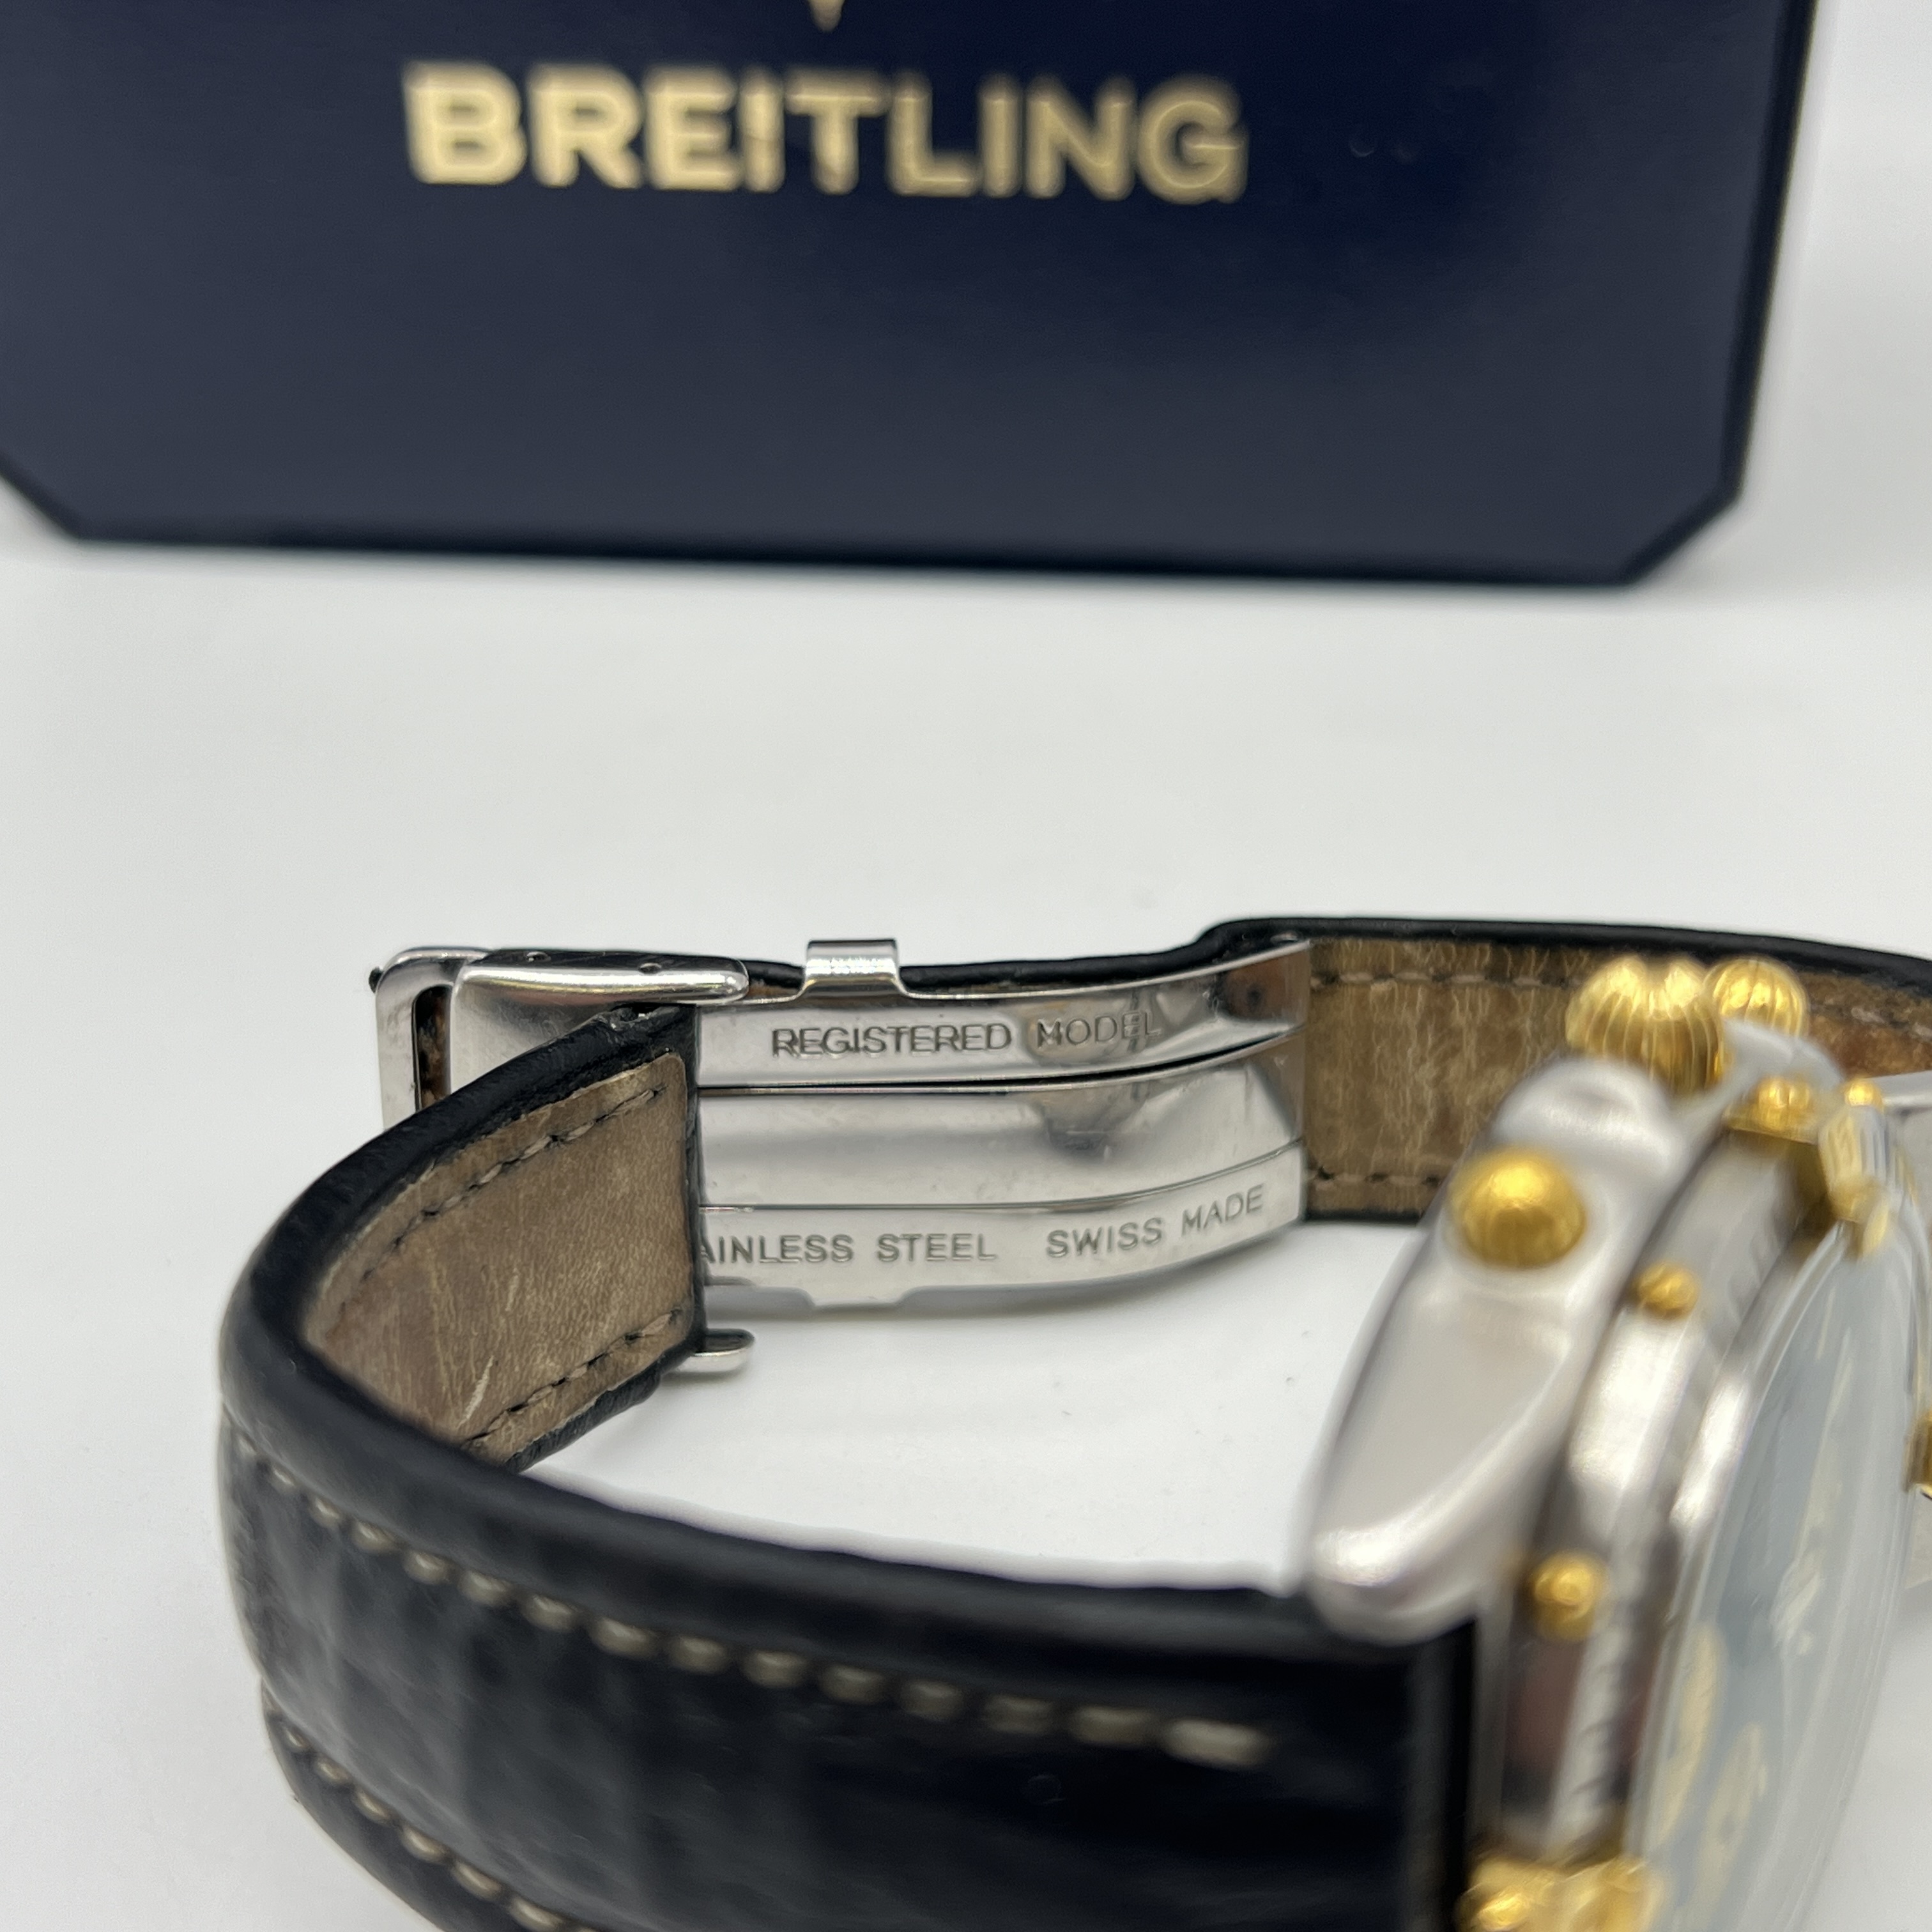 A Breitling chronograph stainless steel and gold watch - Image 6 of 11